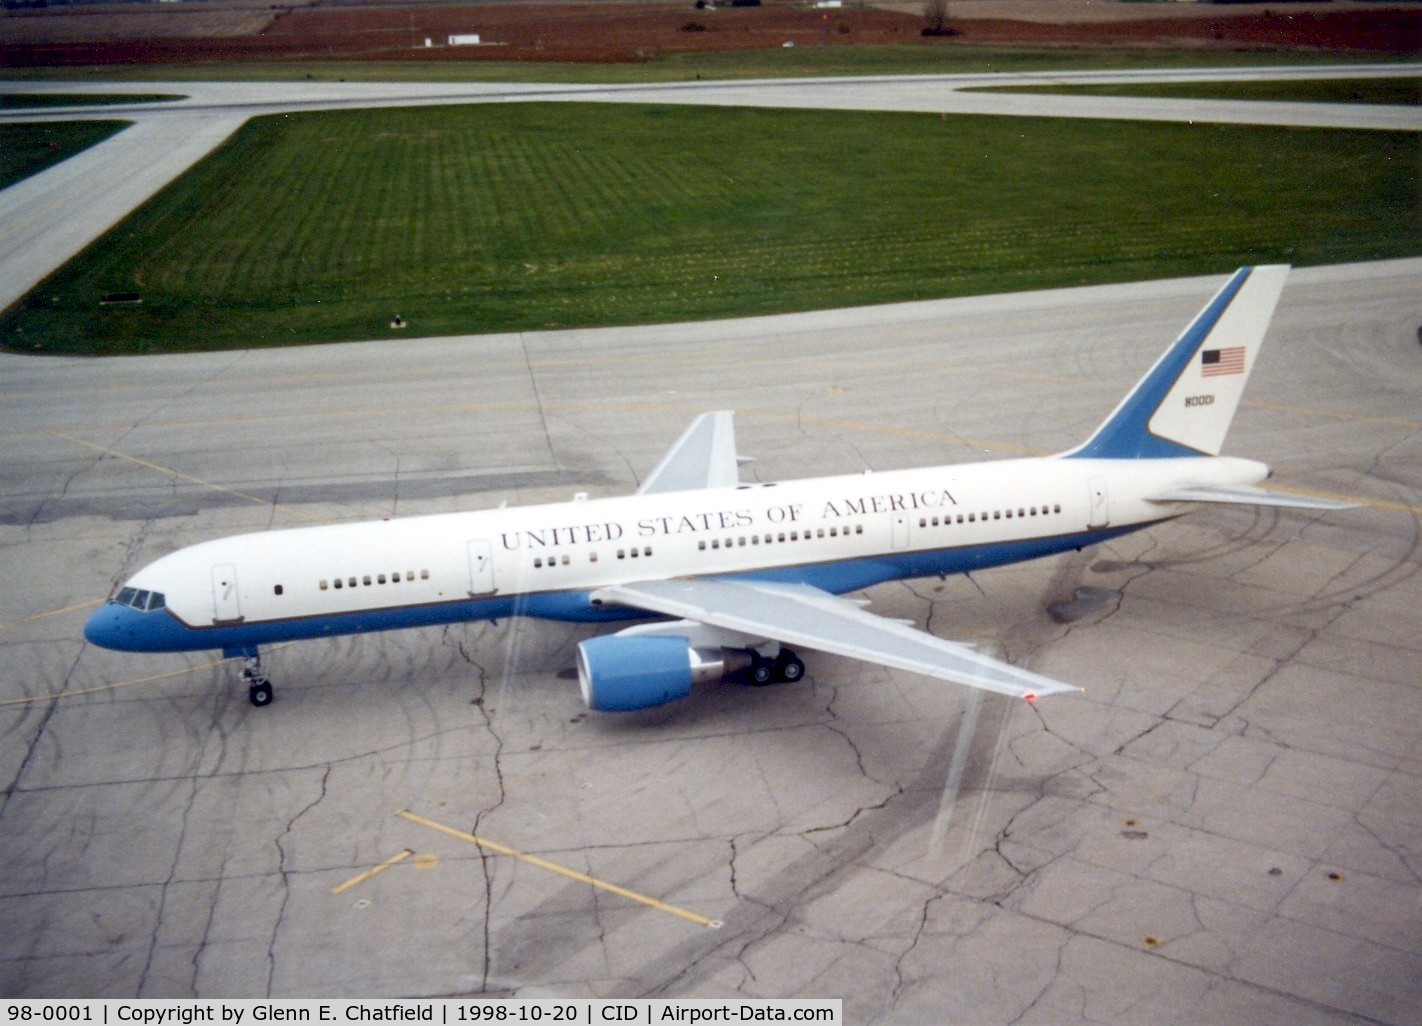 98-0001, 1998 Boeing VC-32A (757-200) C/N 29025, VC-32A buttoned up ready to taxi out